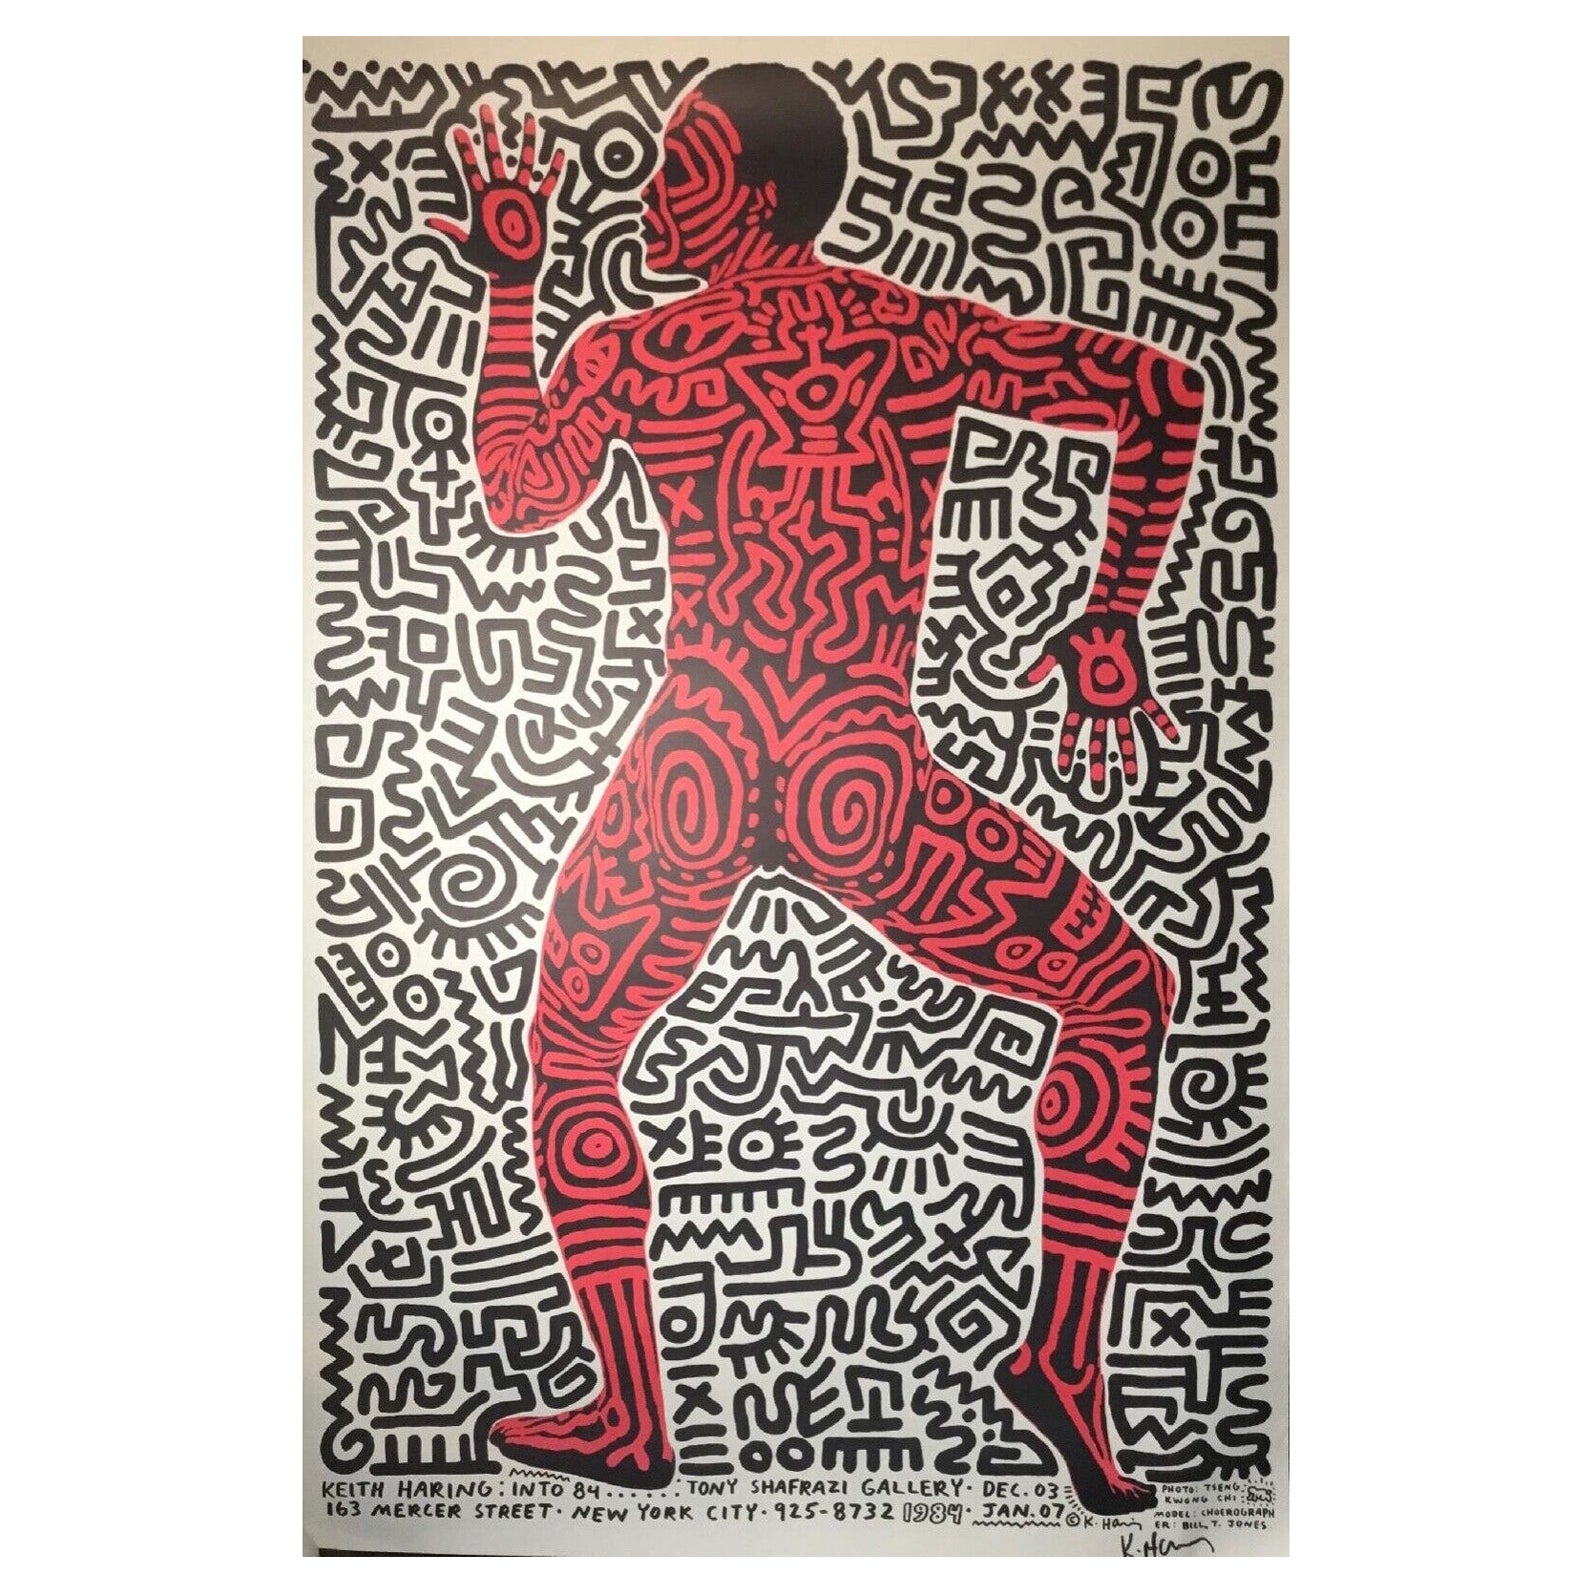 Keith Haring Signed Lithograph Tony Shafrazi Gallery Exhibition Poster Into 84